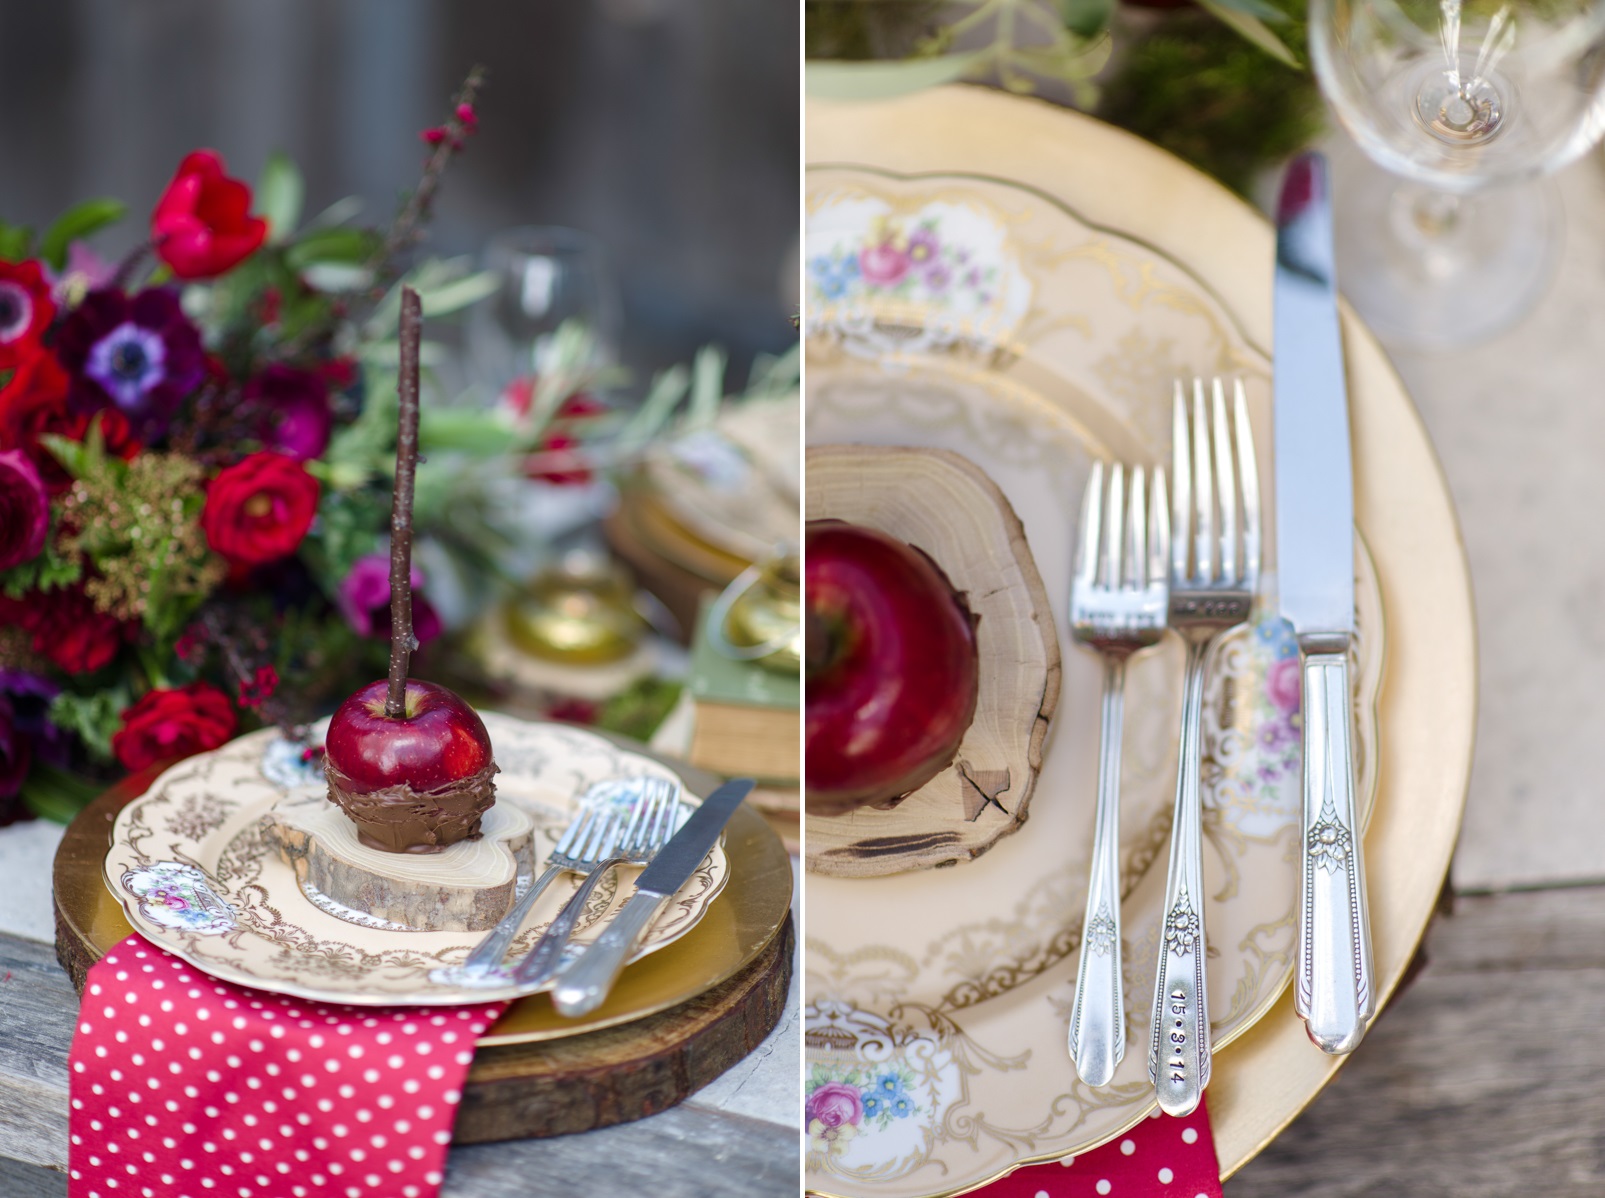 An Autumn Red Place Setting